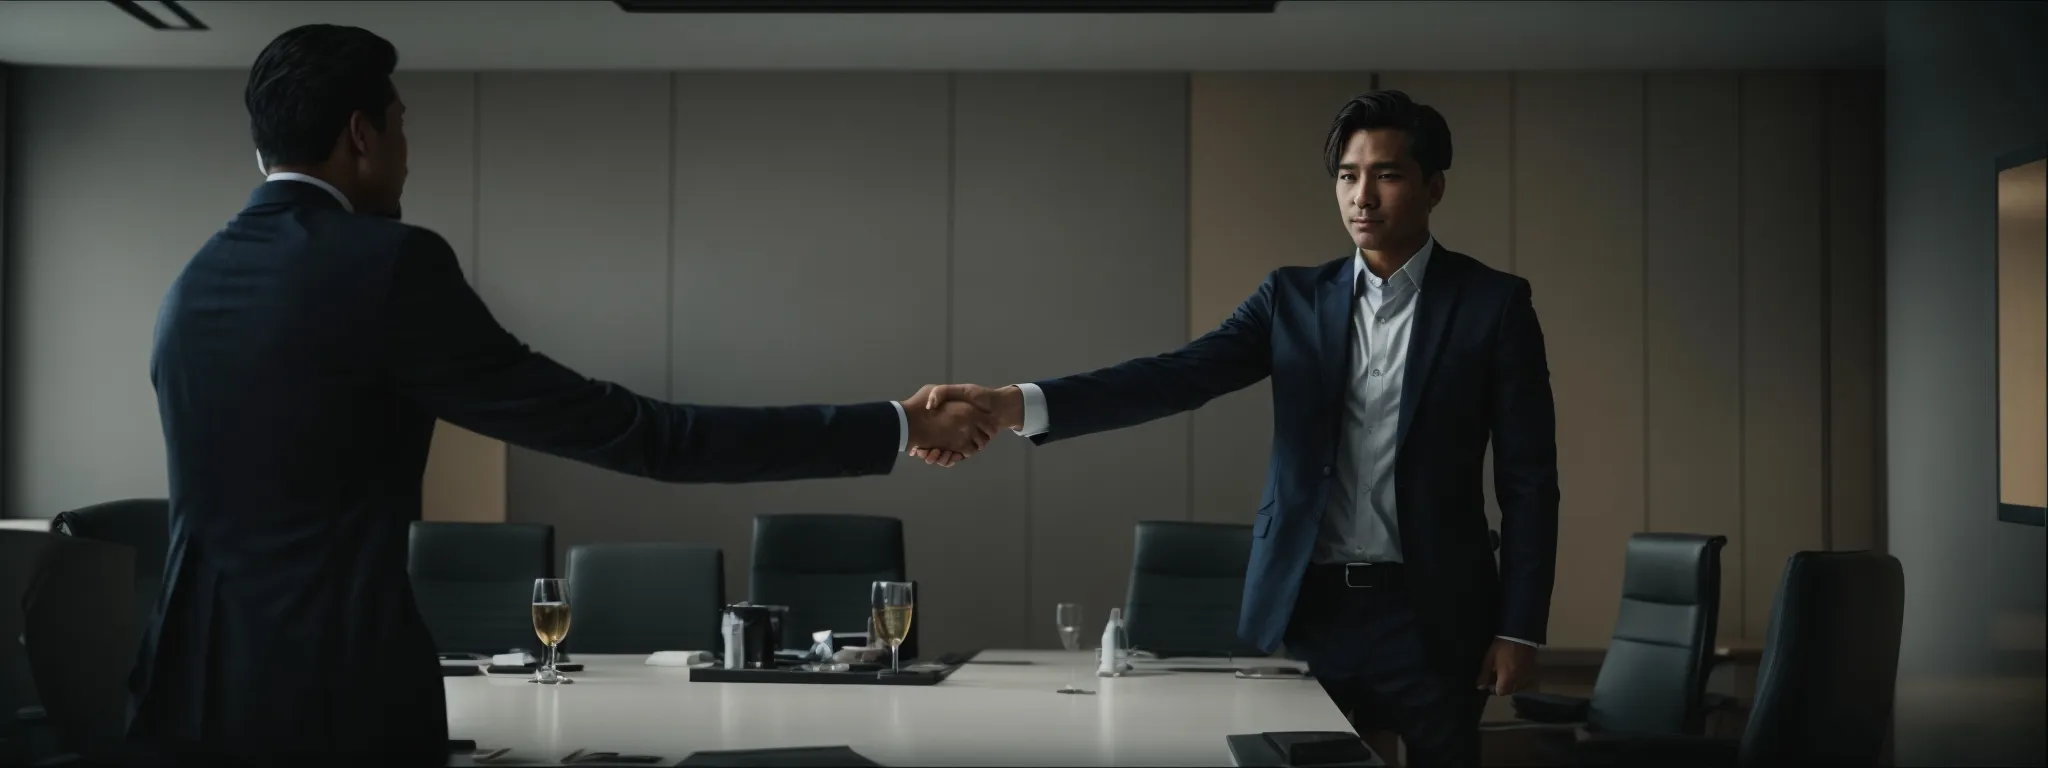 a confident individual shaking hands in a boardroom, symbolizing a successful deal brokered by expert reputation management.